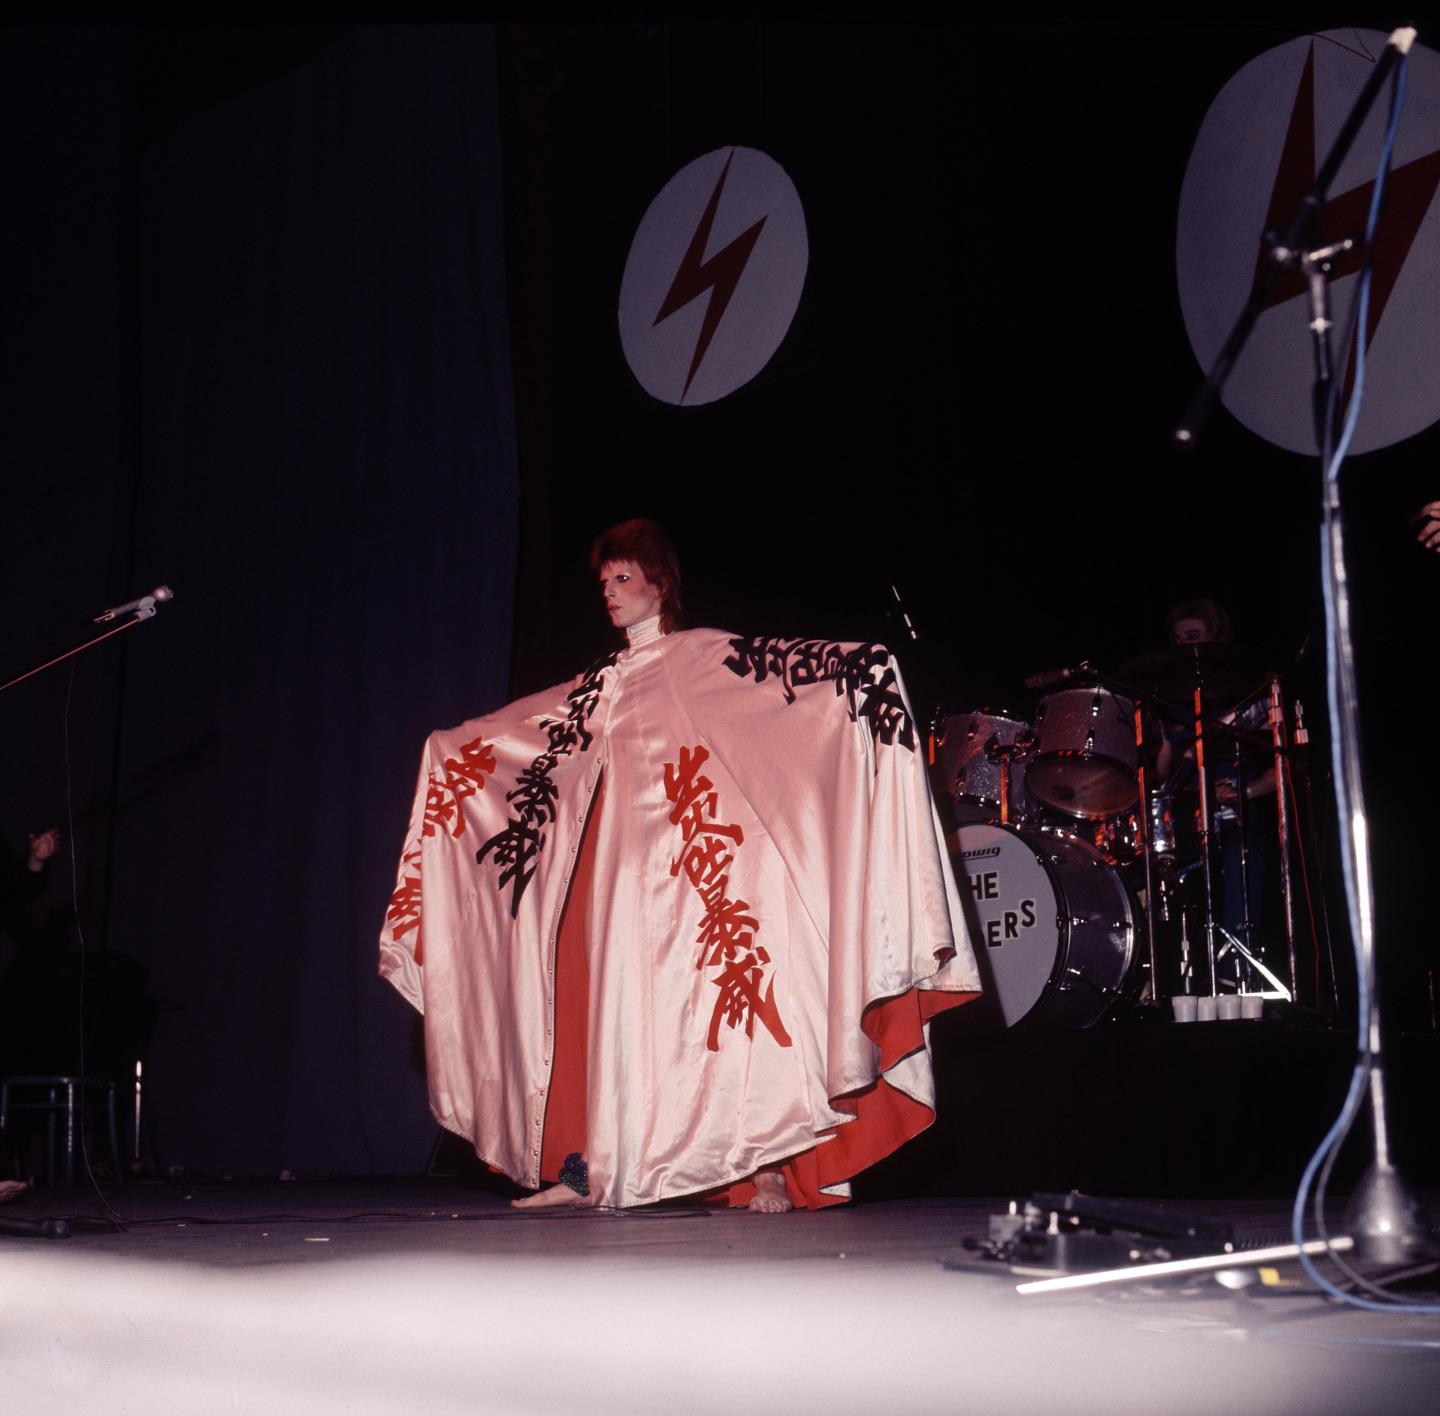 David Bowie in concert in 1973 in his on-stage persona as Ziggy Stardust.